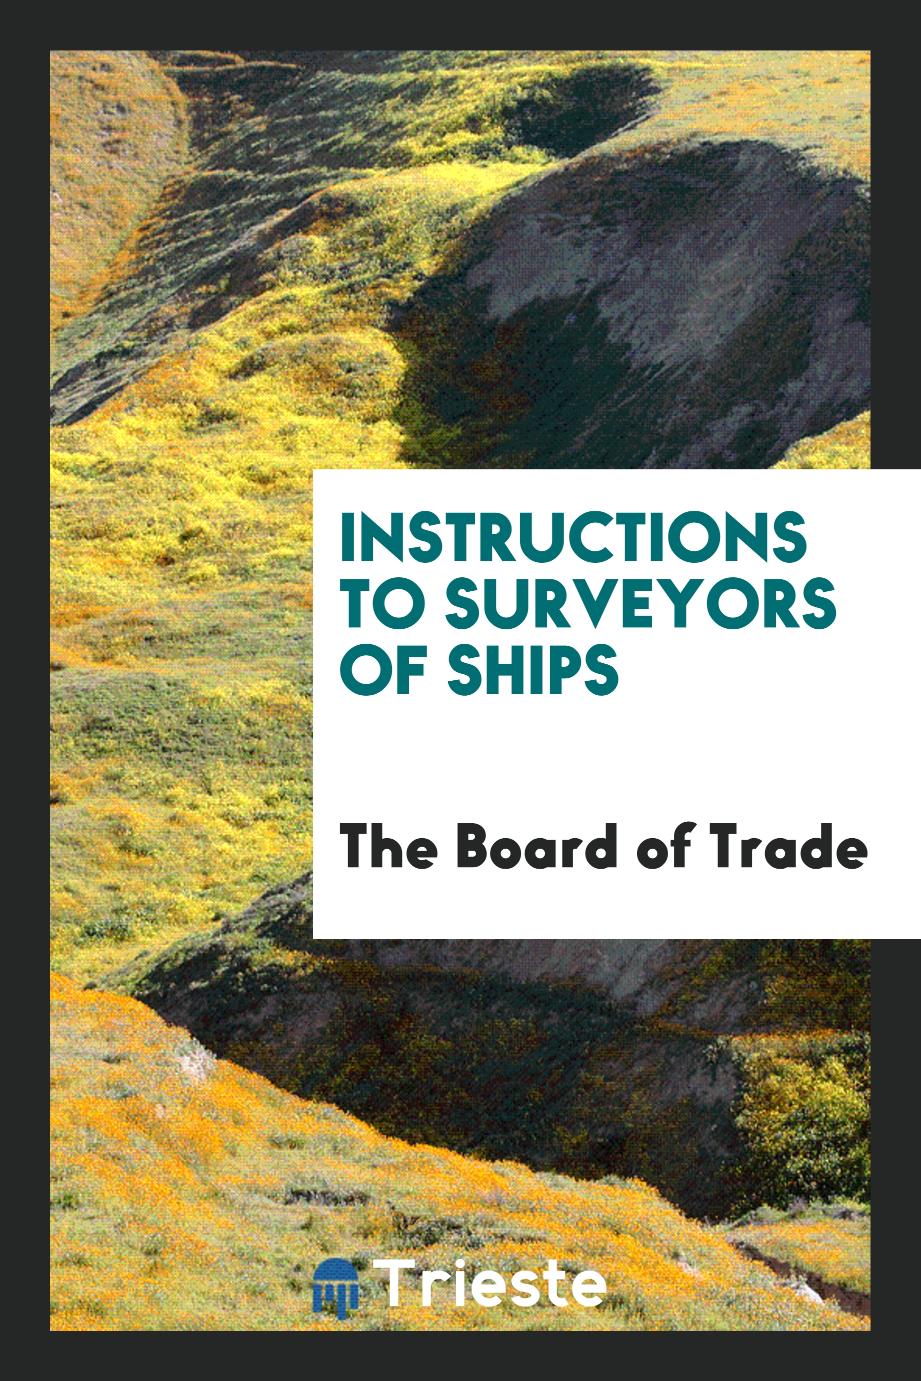 Instructions to Surveyors of Ships